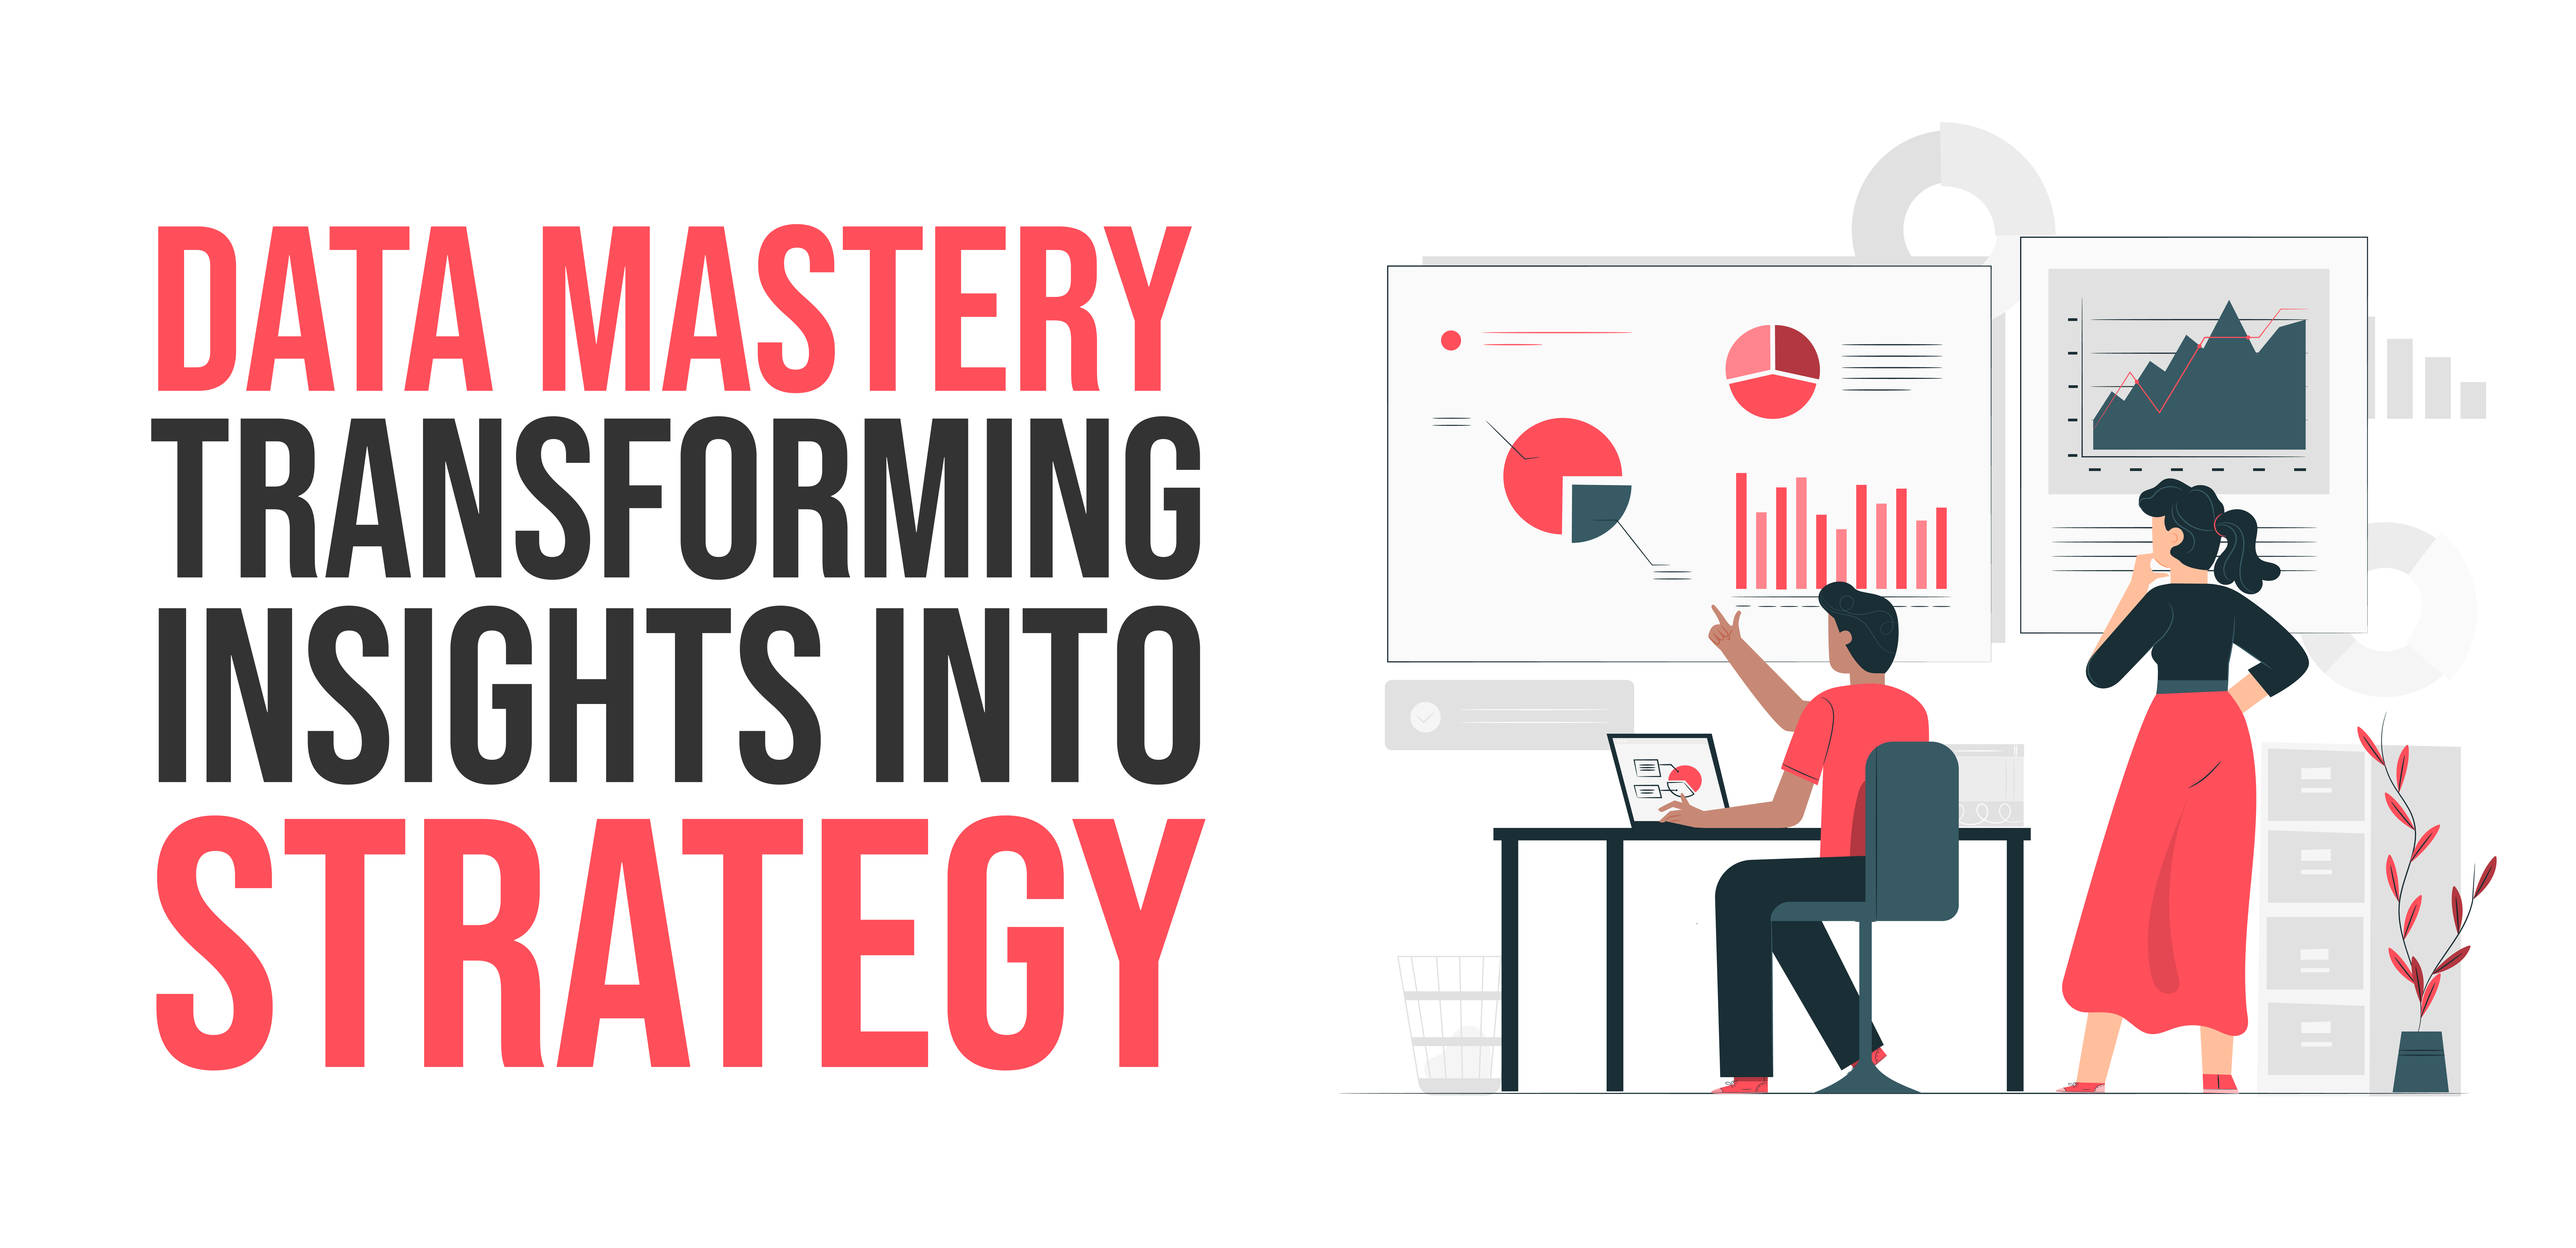 Data Mastery - Transforming Insights into Strategy